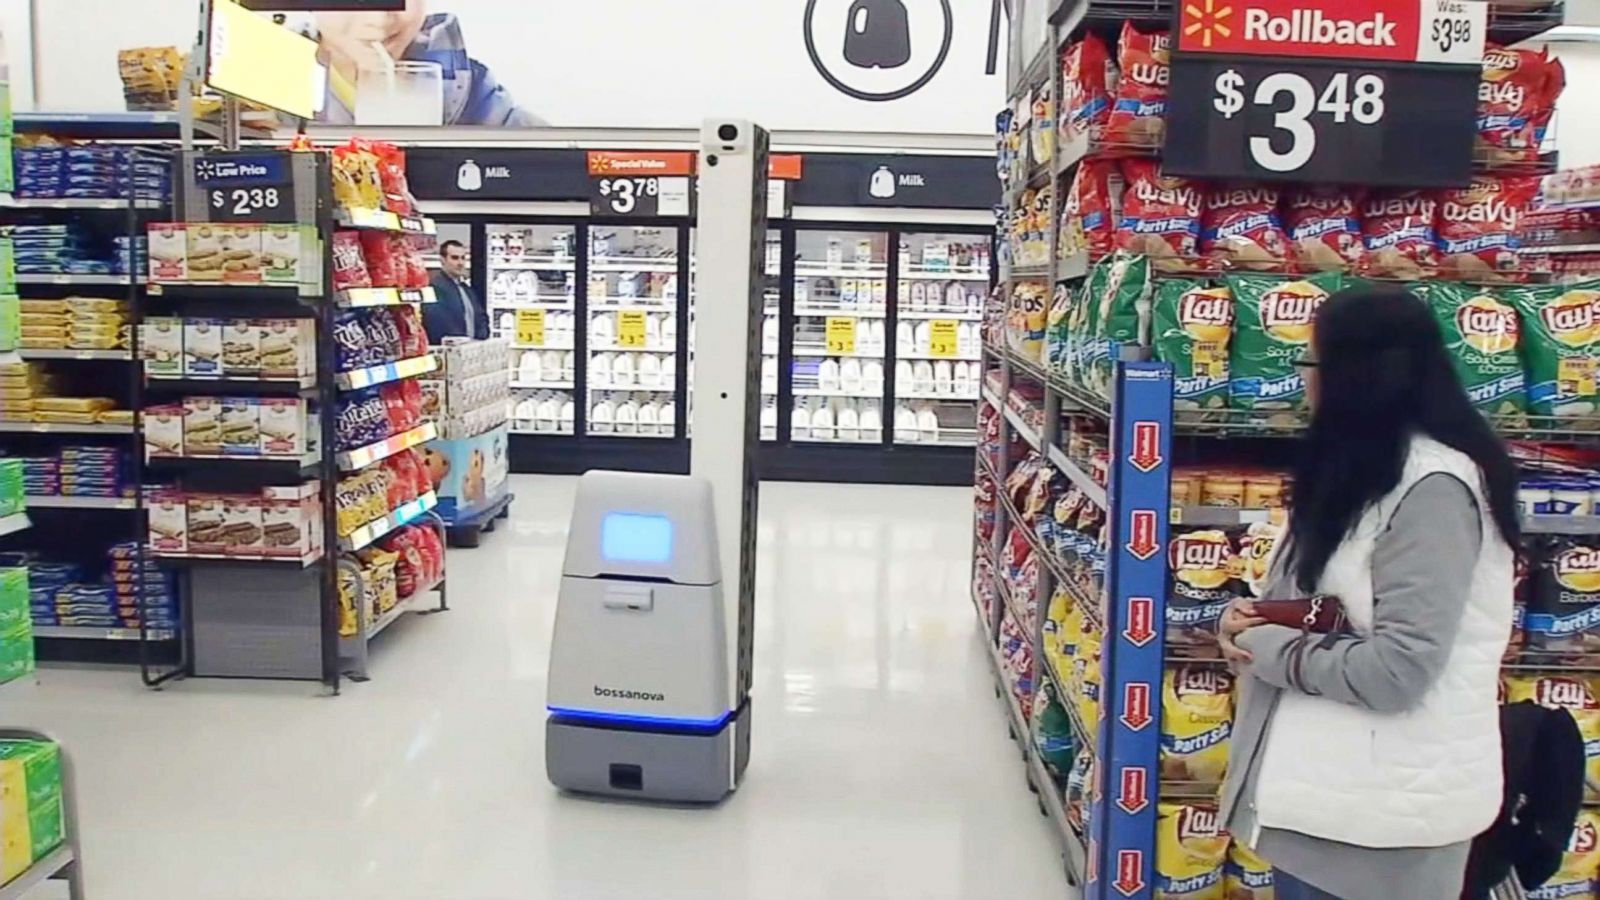 Automation in the retail industry cleaning and inventory tracking robot at Walmart
